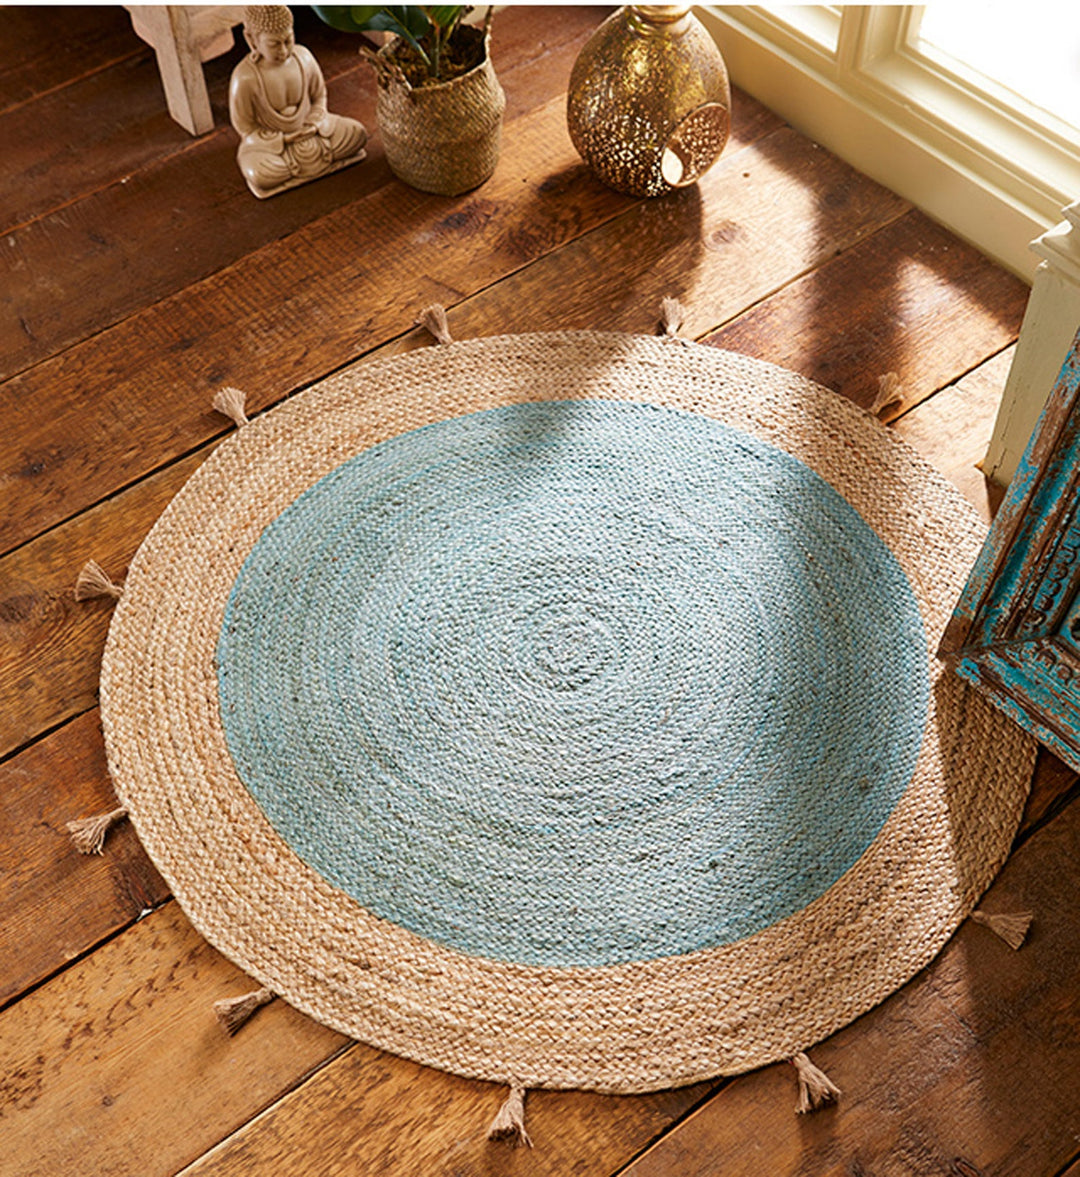 Pale Blue and Natural Round Jute Rug Available in 90 cm or 120 cm